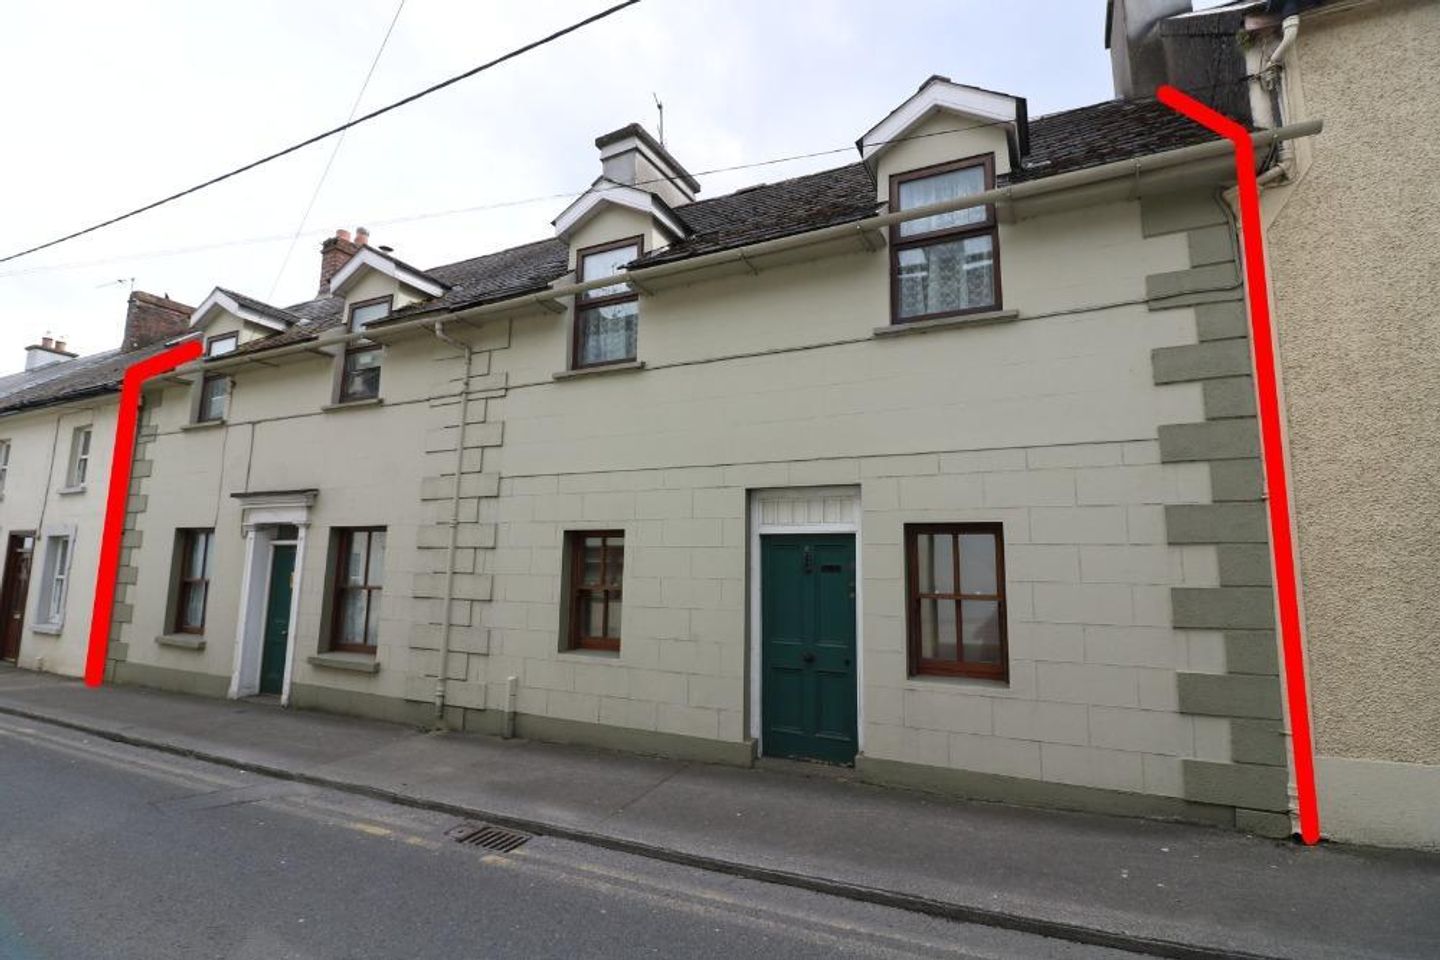 3 William Street, Carrick-on-Suir, Co. Tipperary, E32W314